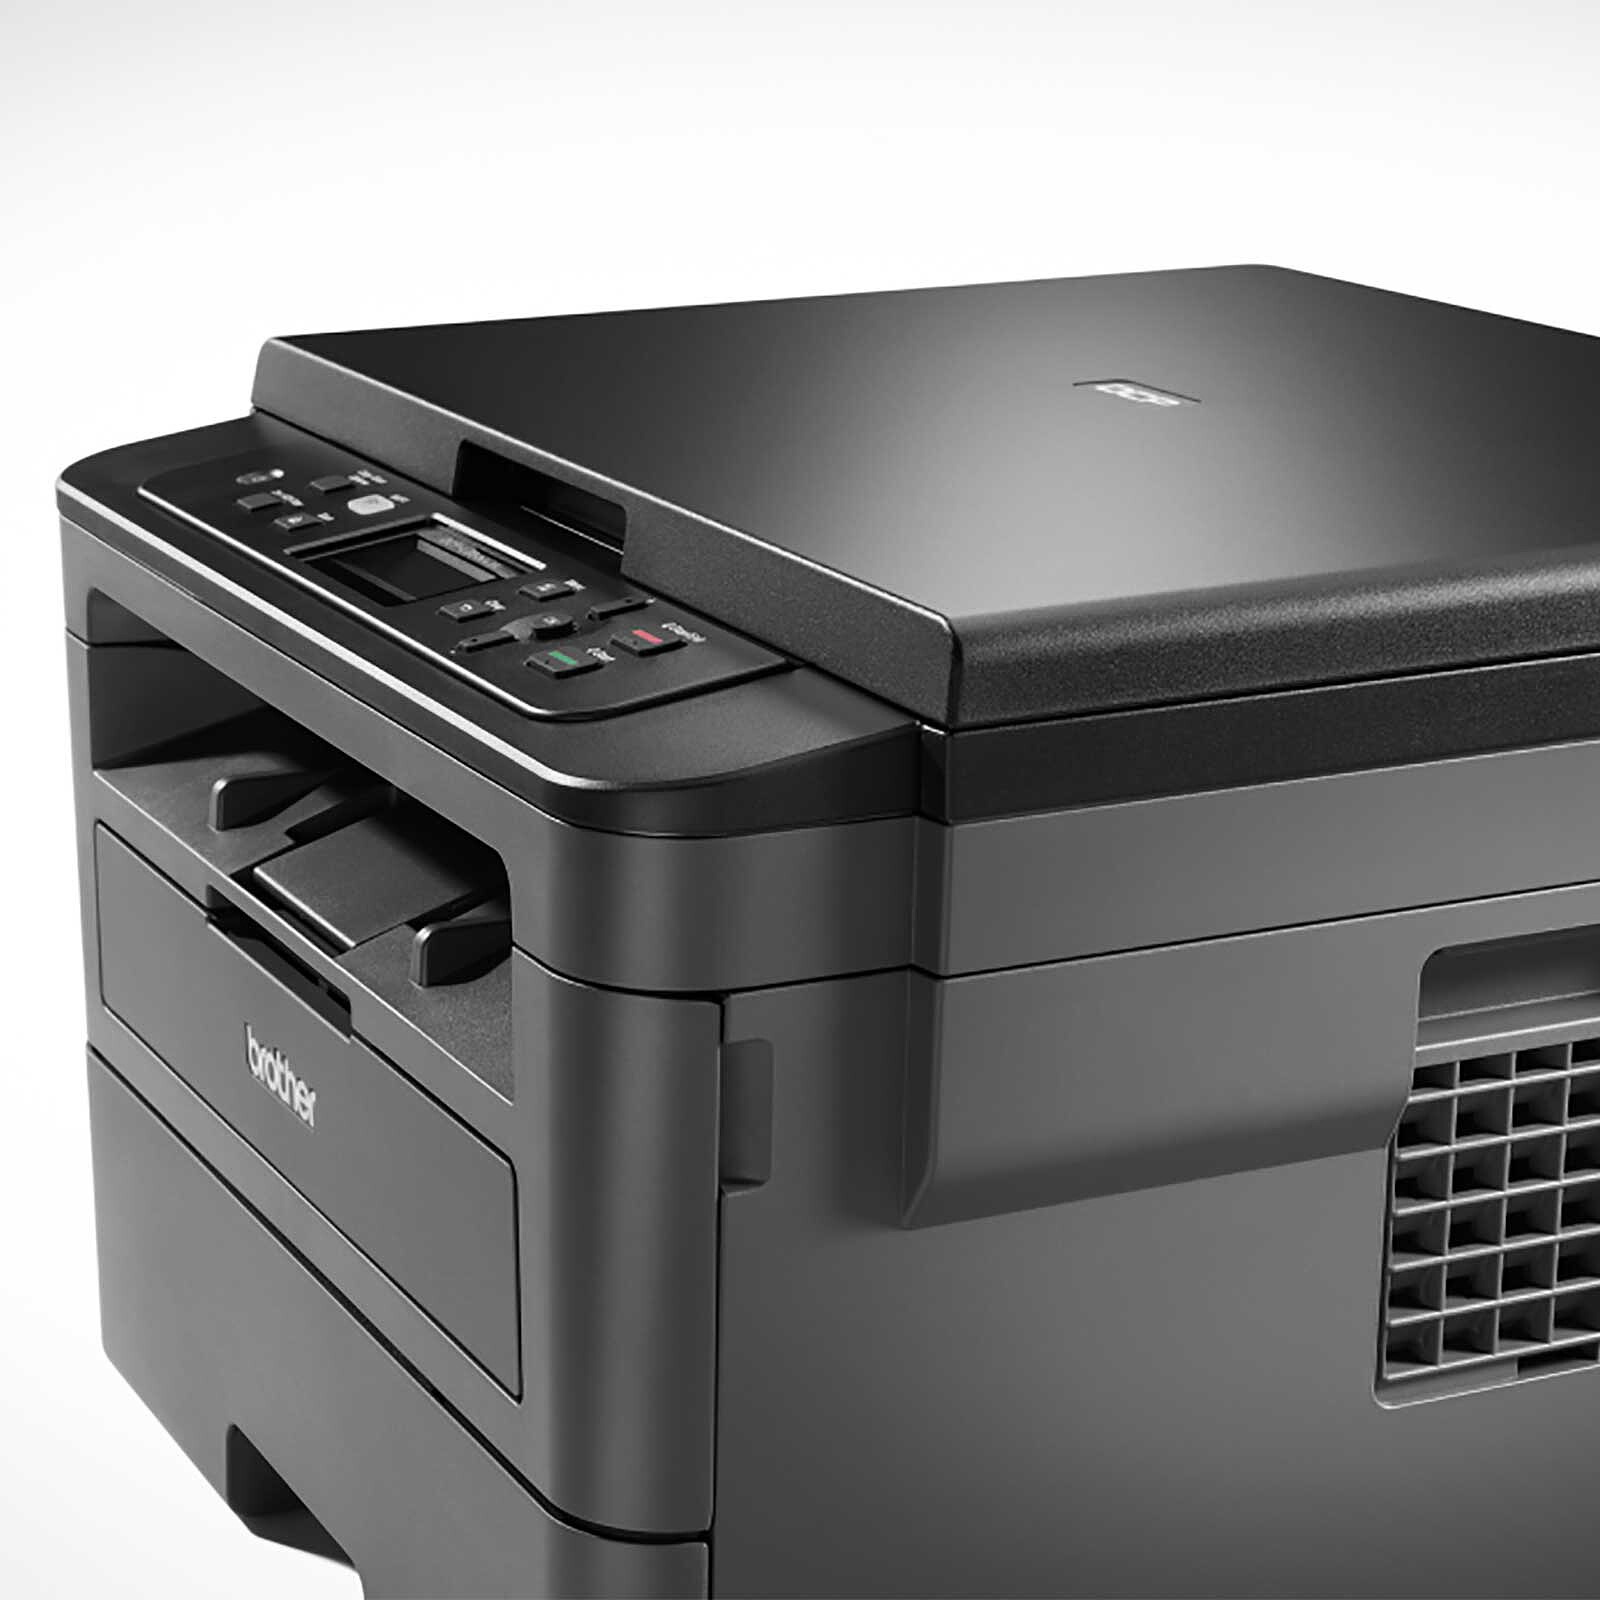 Brother DCP-L2530DW Slow Printing and Looking for Printer Issue (Macbook)  : r/printers